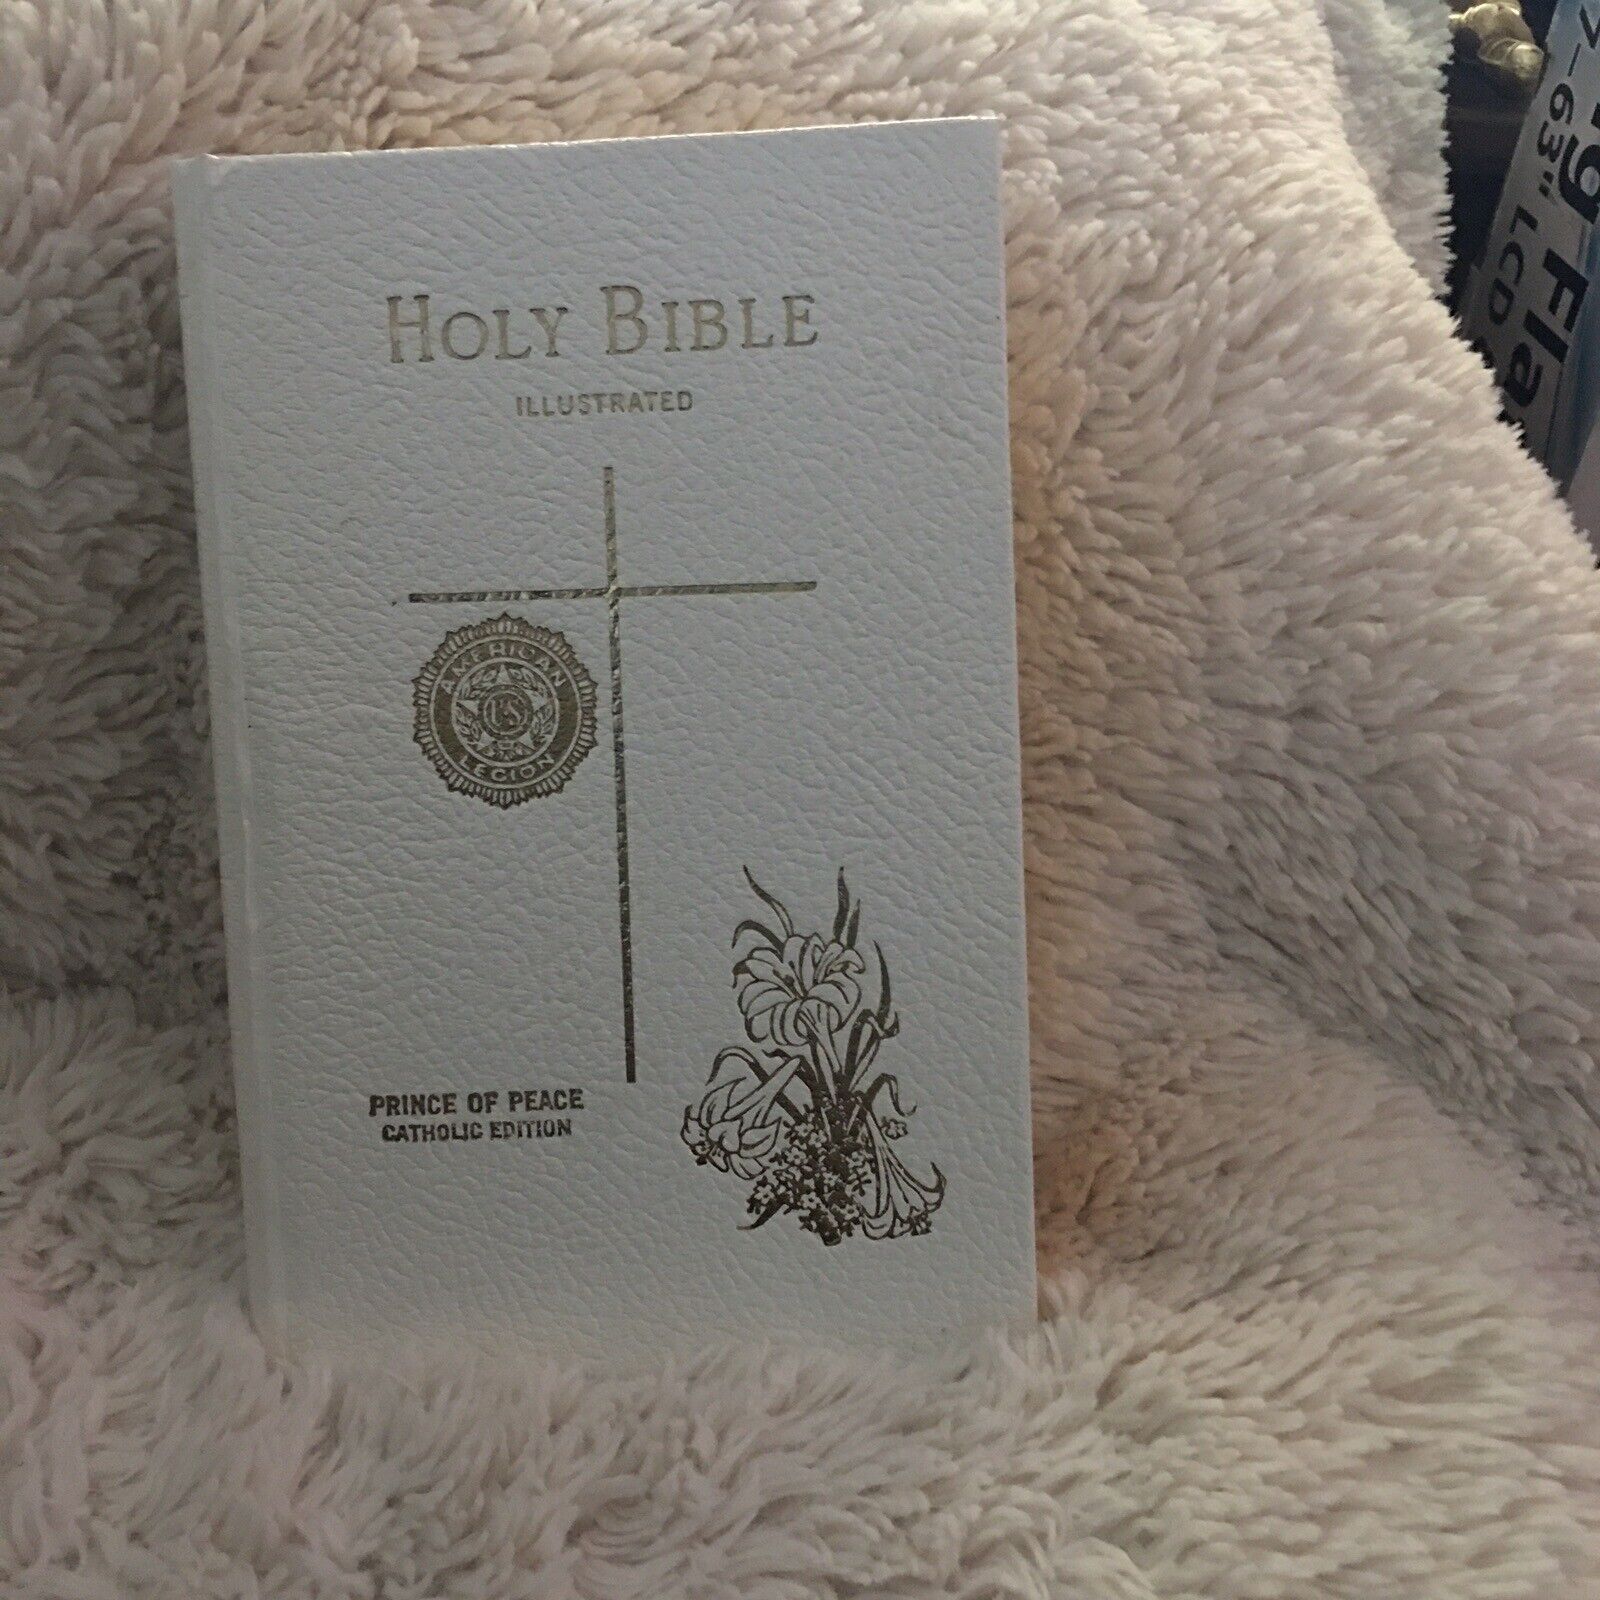 Vtg Holy Bible Illustrated Prince of Peace Catholic Edition 1976 New American